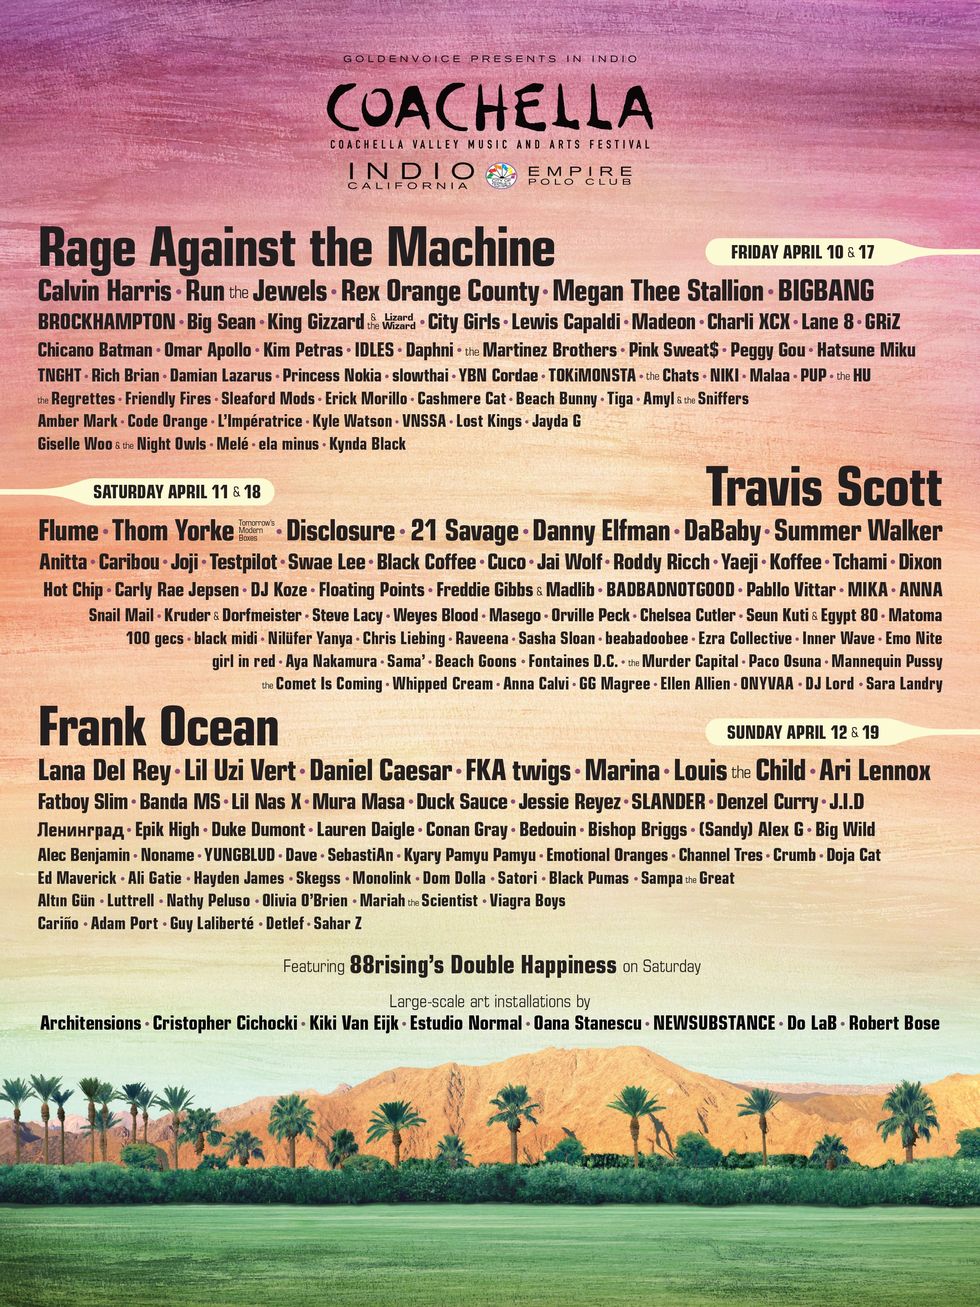 BIGBANG was part of the lineup for Coachella 2020